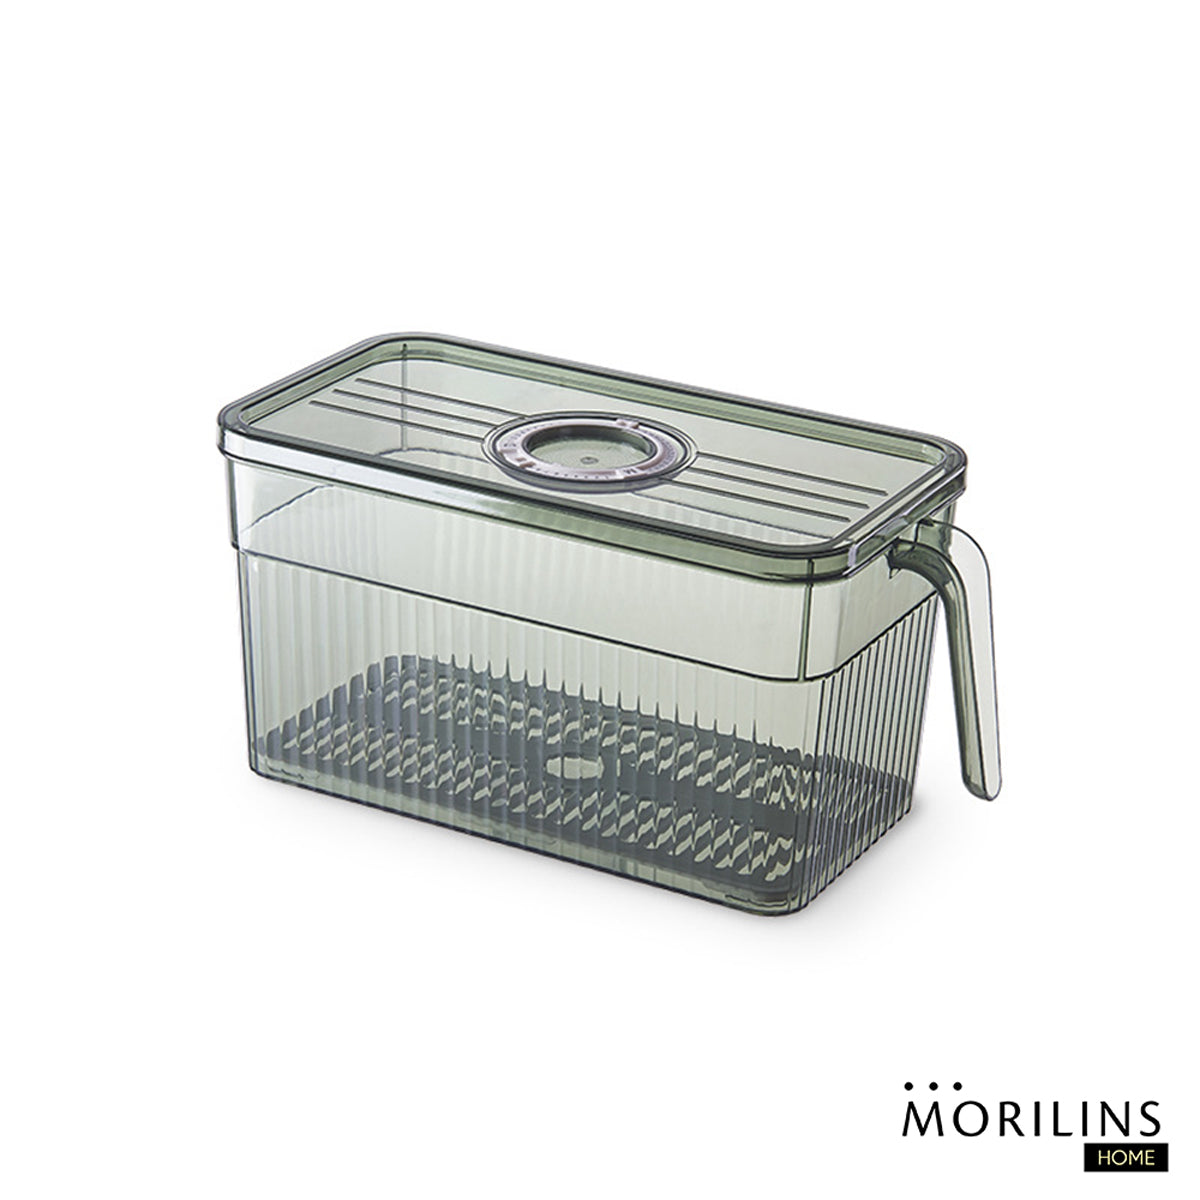 [Morilins Home] Designer Fridge Produce Organizer - BPA-Free, with Handle & Date Cover, Includes a Unique Condensation Tray for Fresh Produce Storage - Bloom Concept